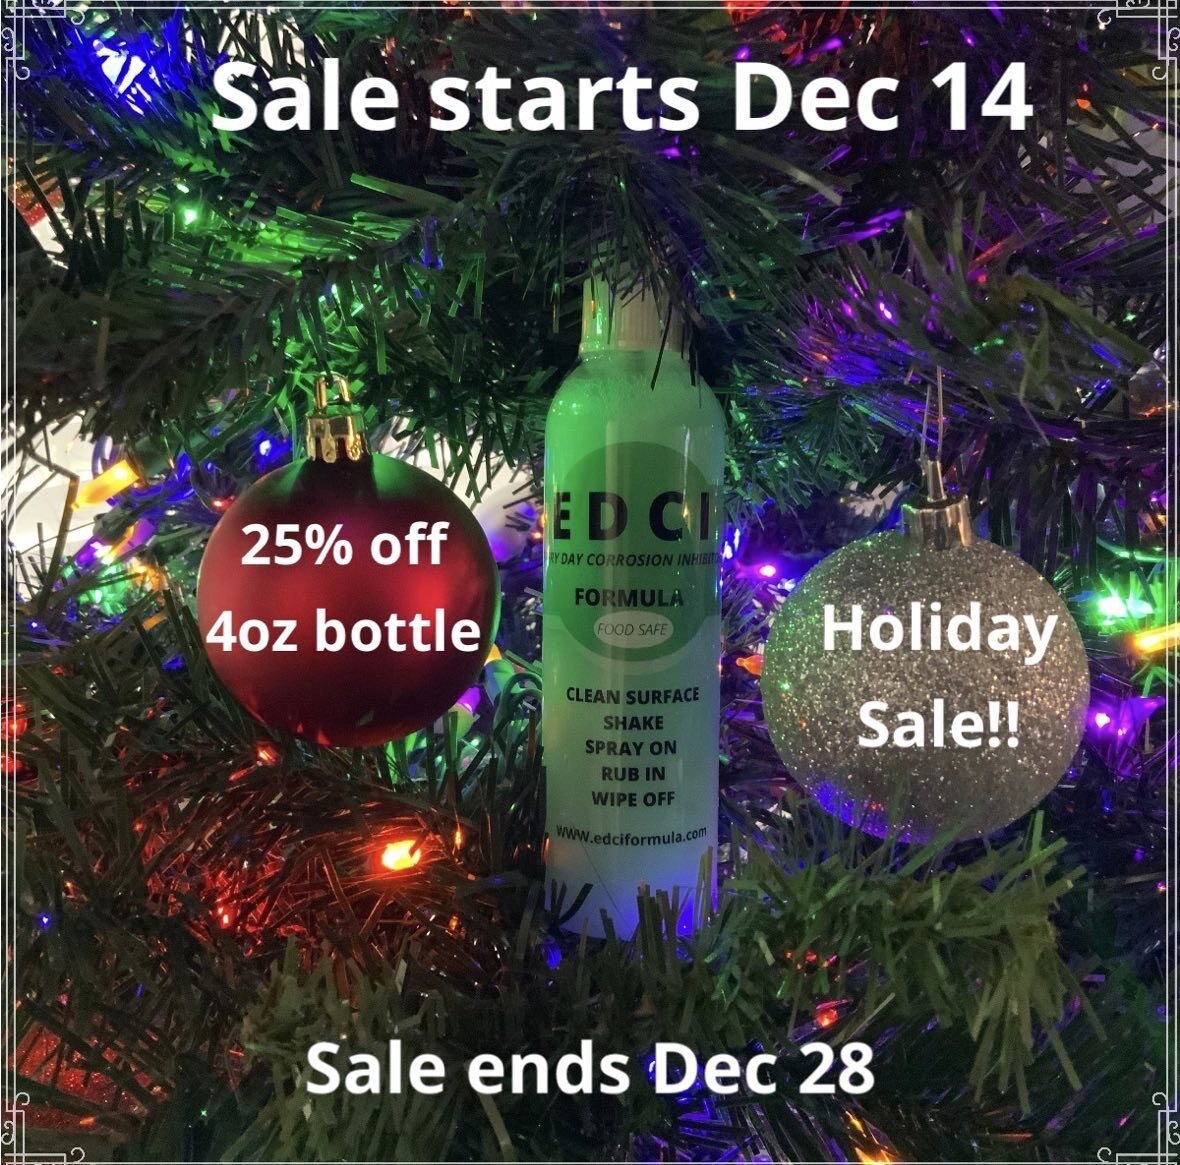 Discount code : HOLIDAY25
Christmas stocking stuffer!!! 
Gift EDCI  formula to family and friends!
EDCI formula is food safe!
This is not an oil. So no sticky residue!
Great for Chefs, home cooking experts and grill experts to help keep their
Kitchen